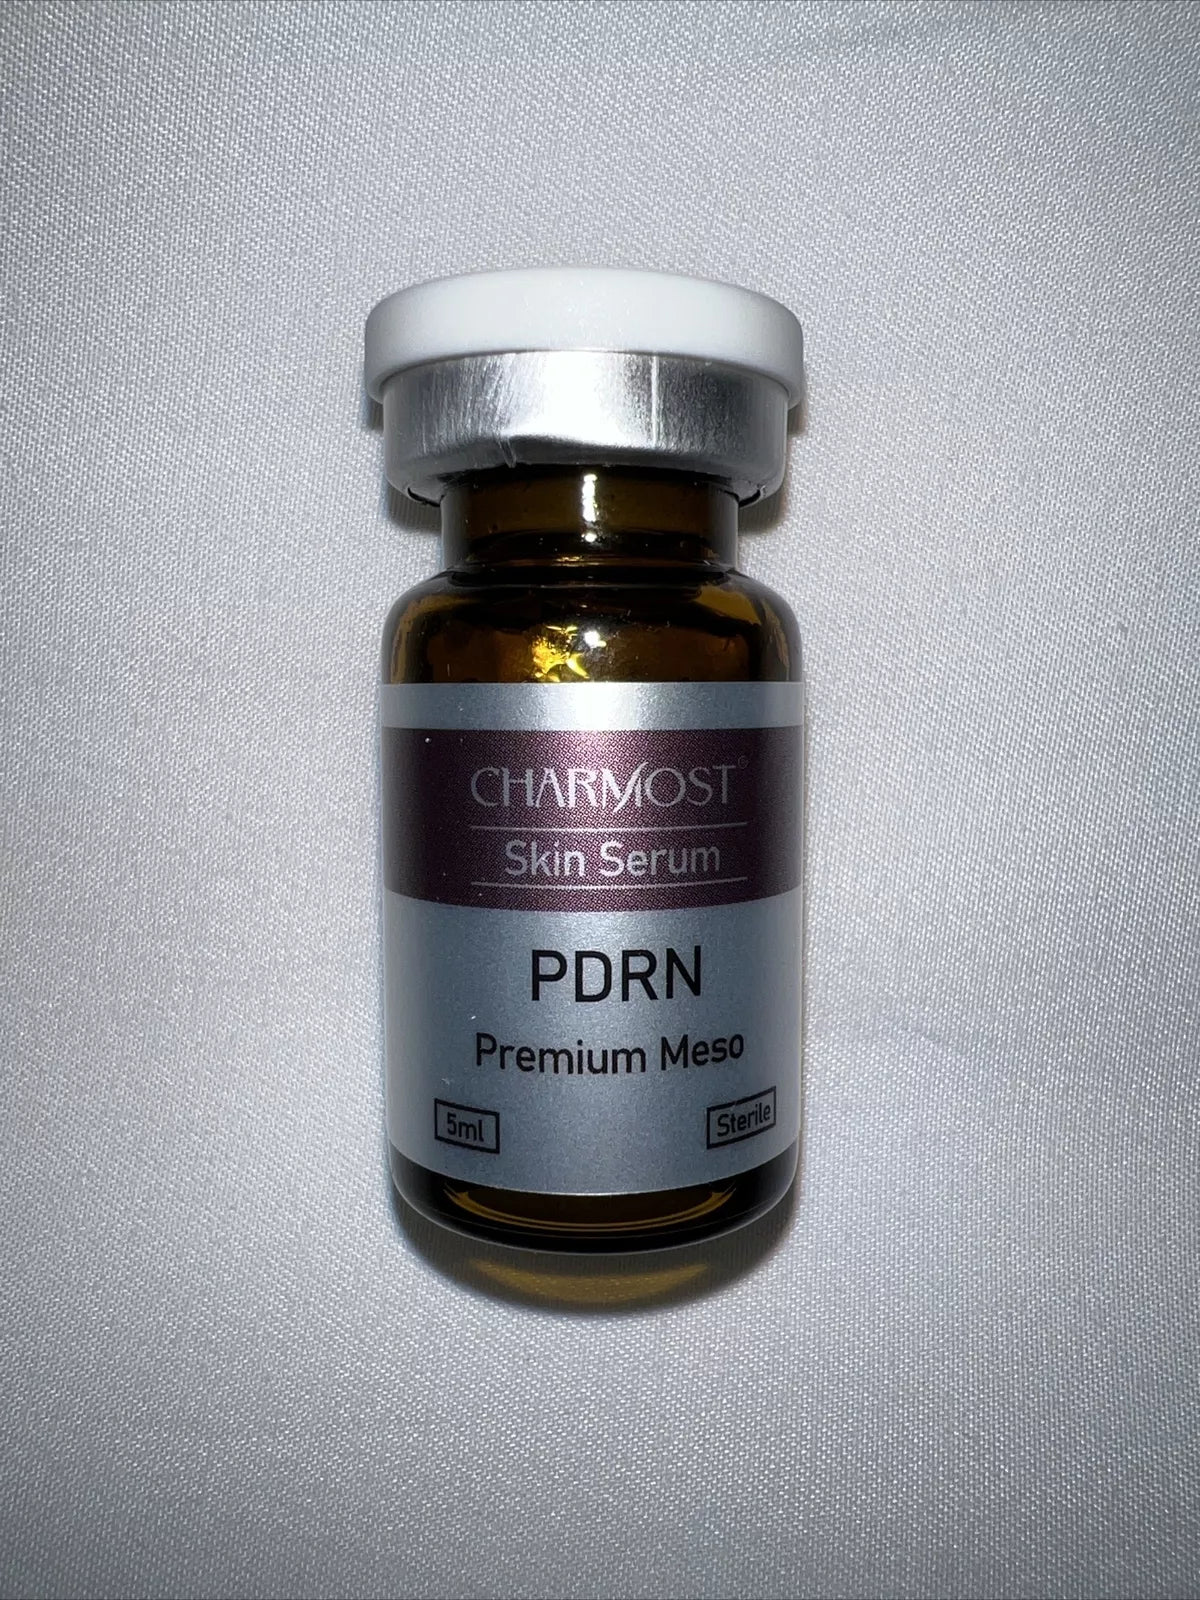 Pure PDRN Serum Anti Aging Mesotherapy HA Microneedle HA, Polynucleotide- One bottle of vial only